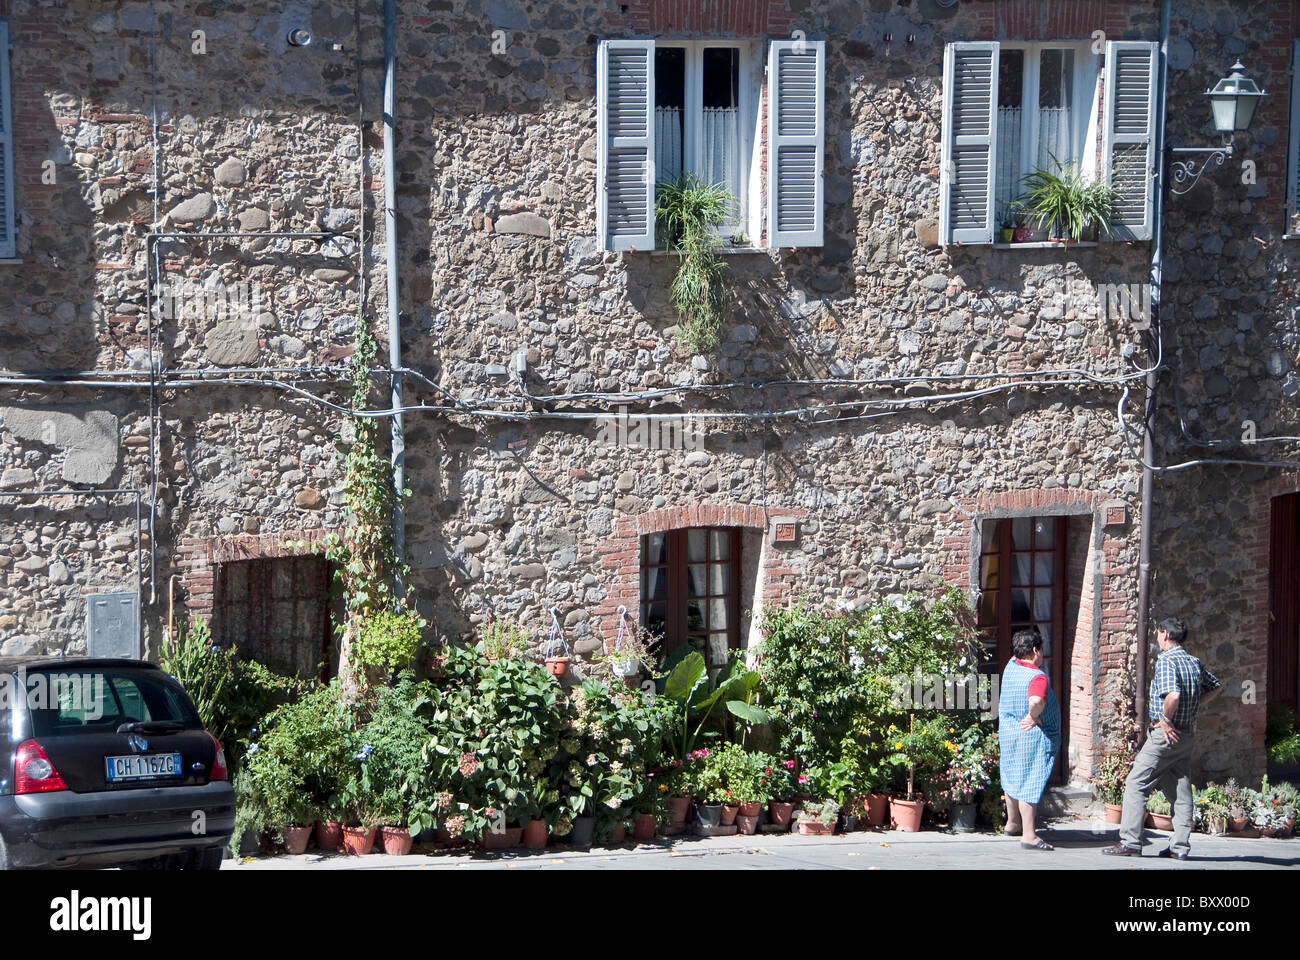 Man and a woman, chatting in the sun in the Umbrian town of Ficulle, Italy Stock Photo